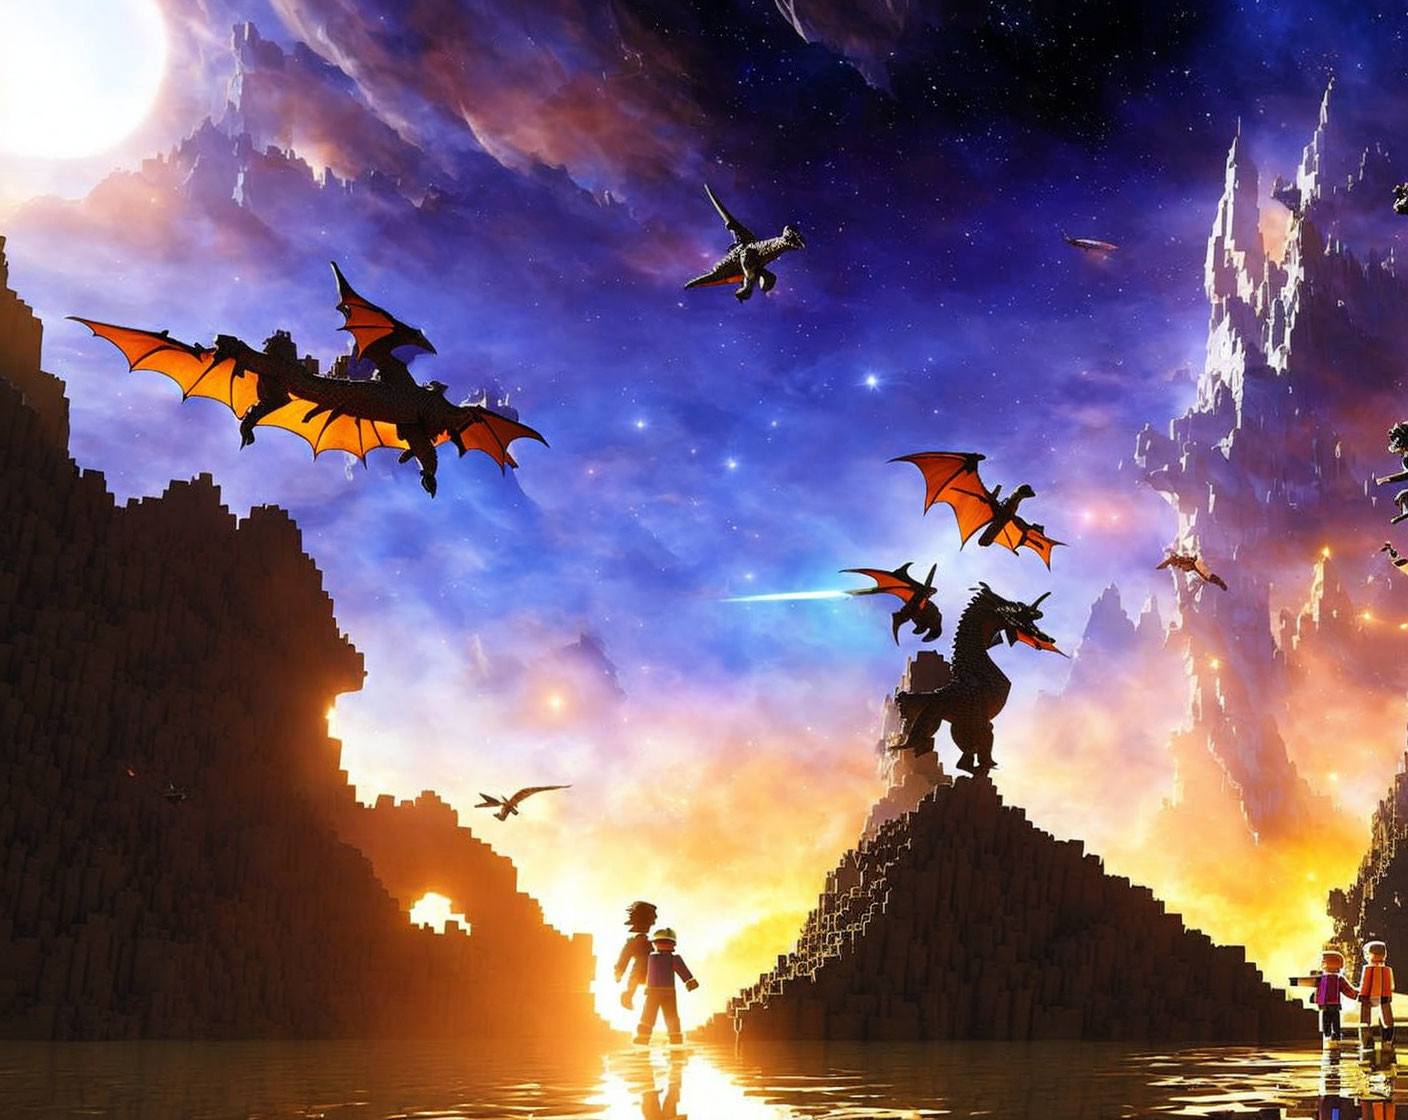 Dragons perched on rocks under cosmic sky with human figures